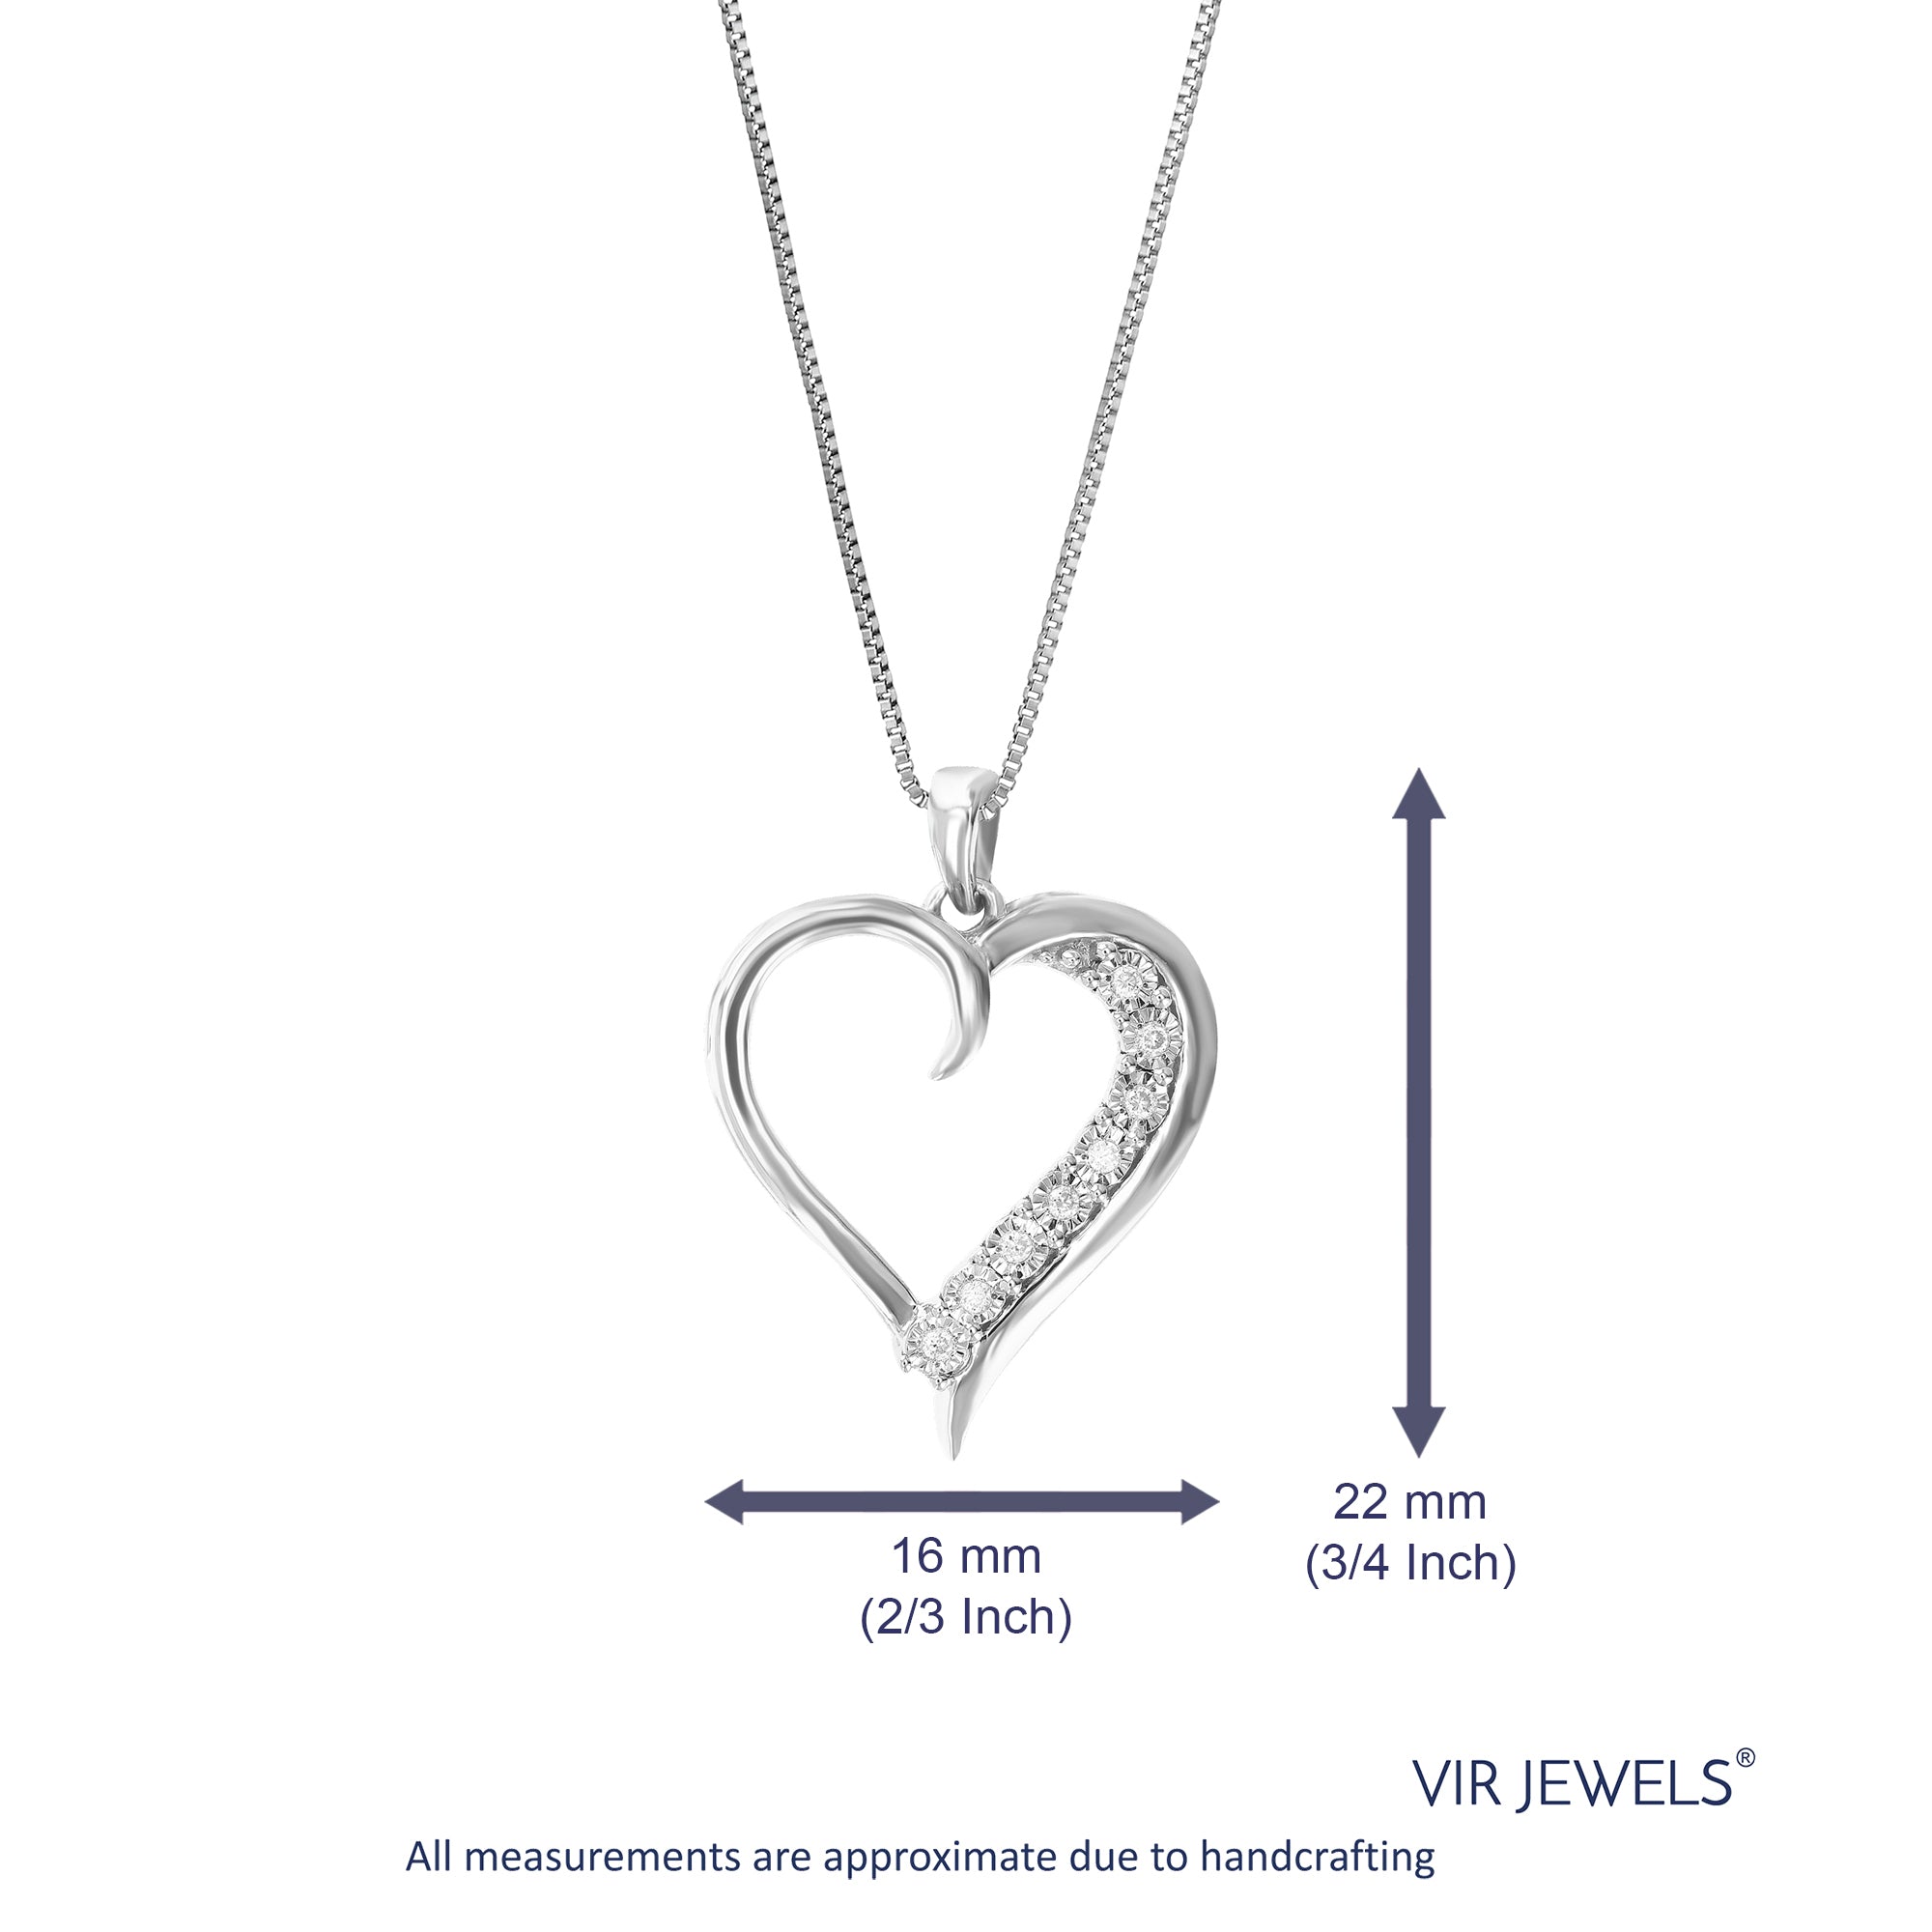 1/14 cttw Diamond Pendant Necklace for Women, Lab Grown Diamond Heart Pendant Necklace in .925 Sterling Silver with Chain, Size 1 Inch